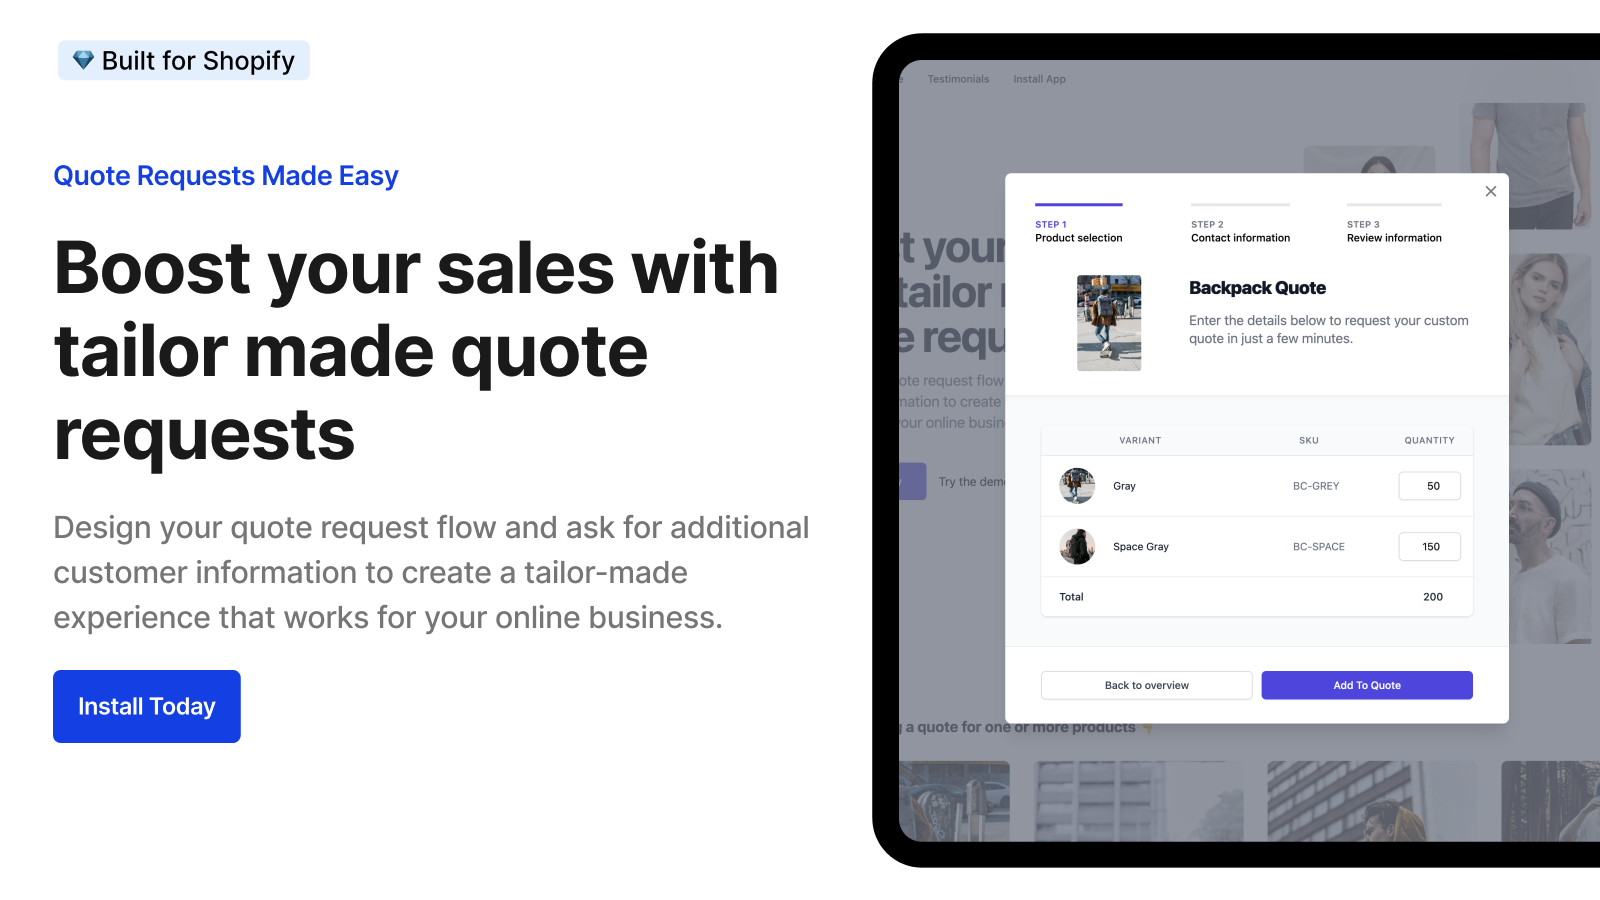 Add one or multiple products or variants to your quote request